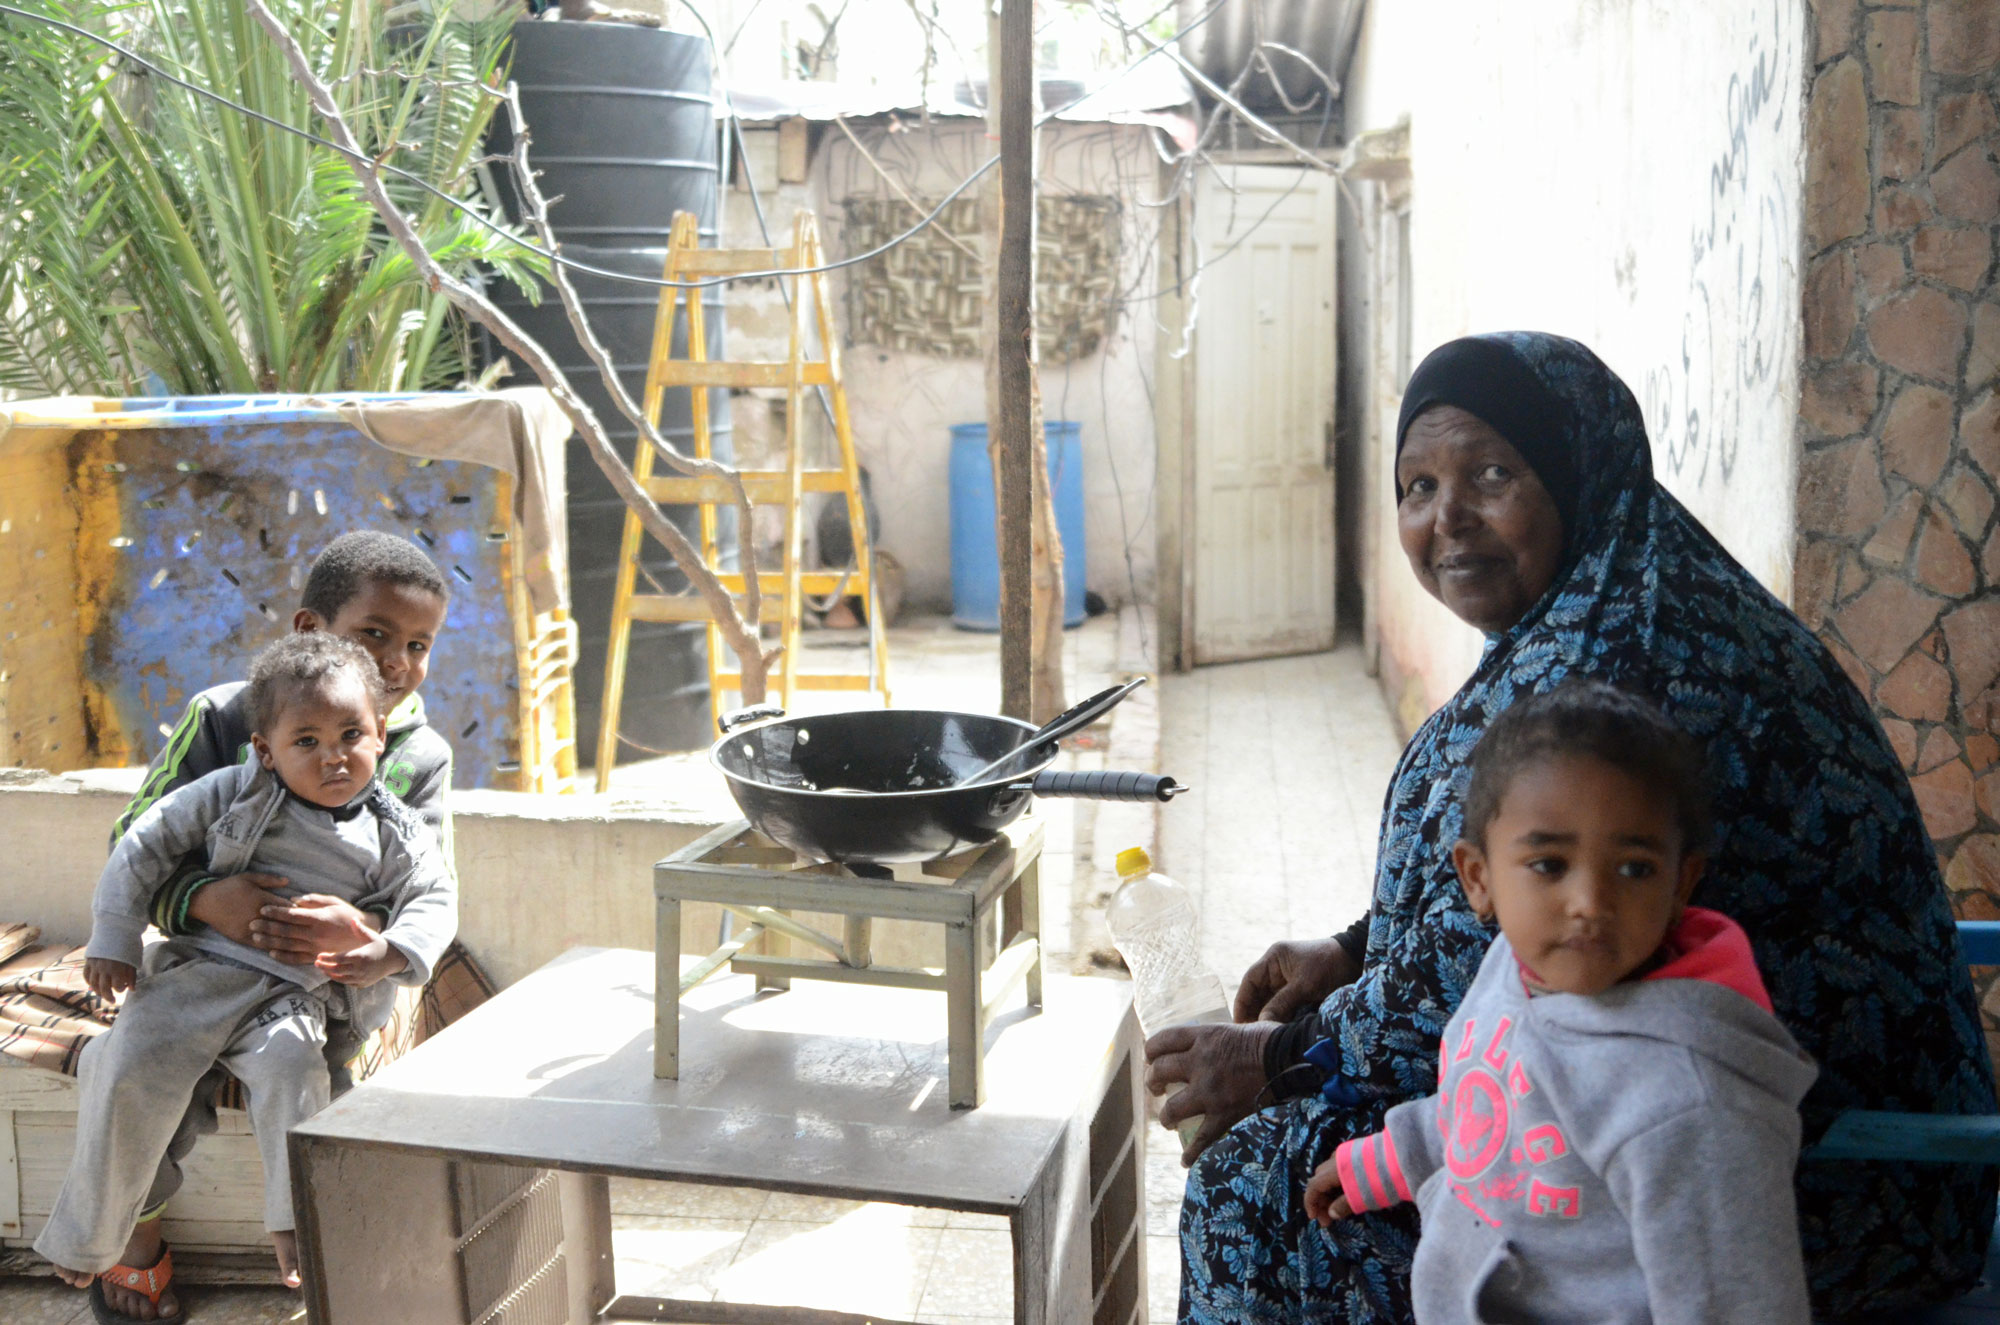 Gaza biogas digesters provide fuel for cooking and heating.